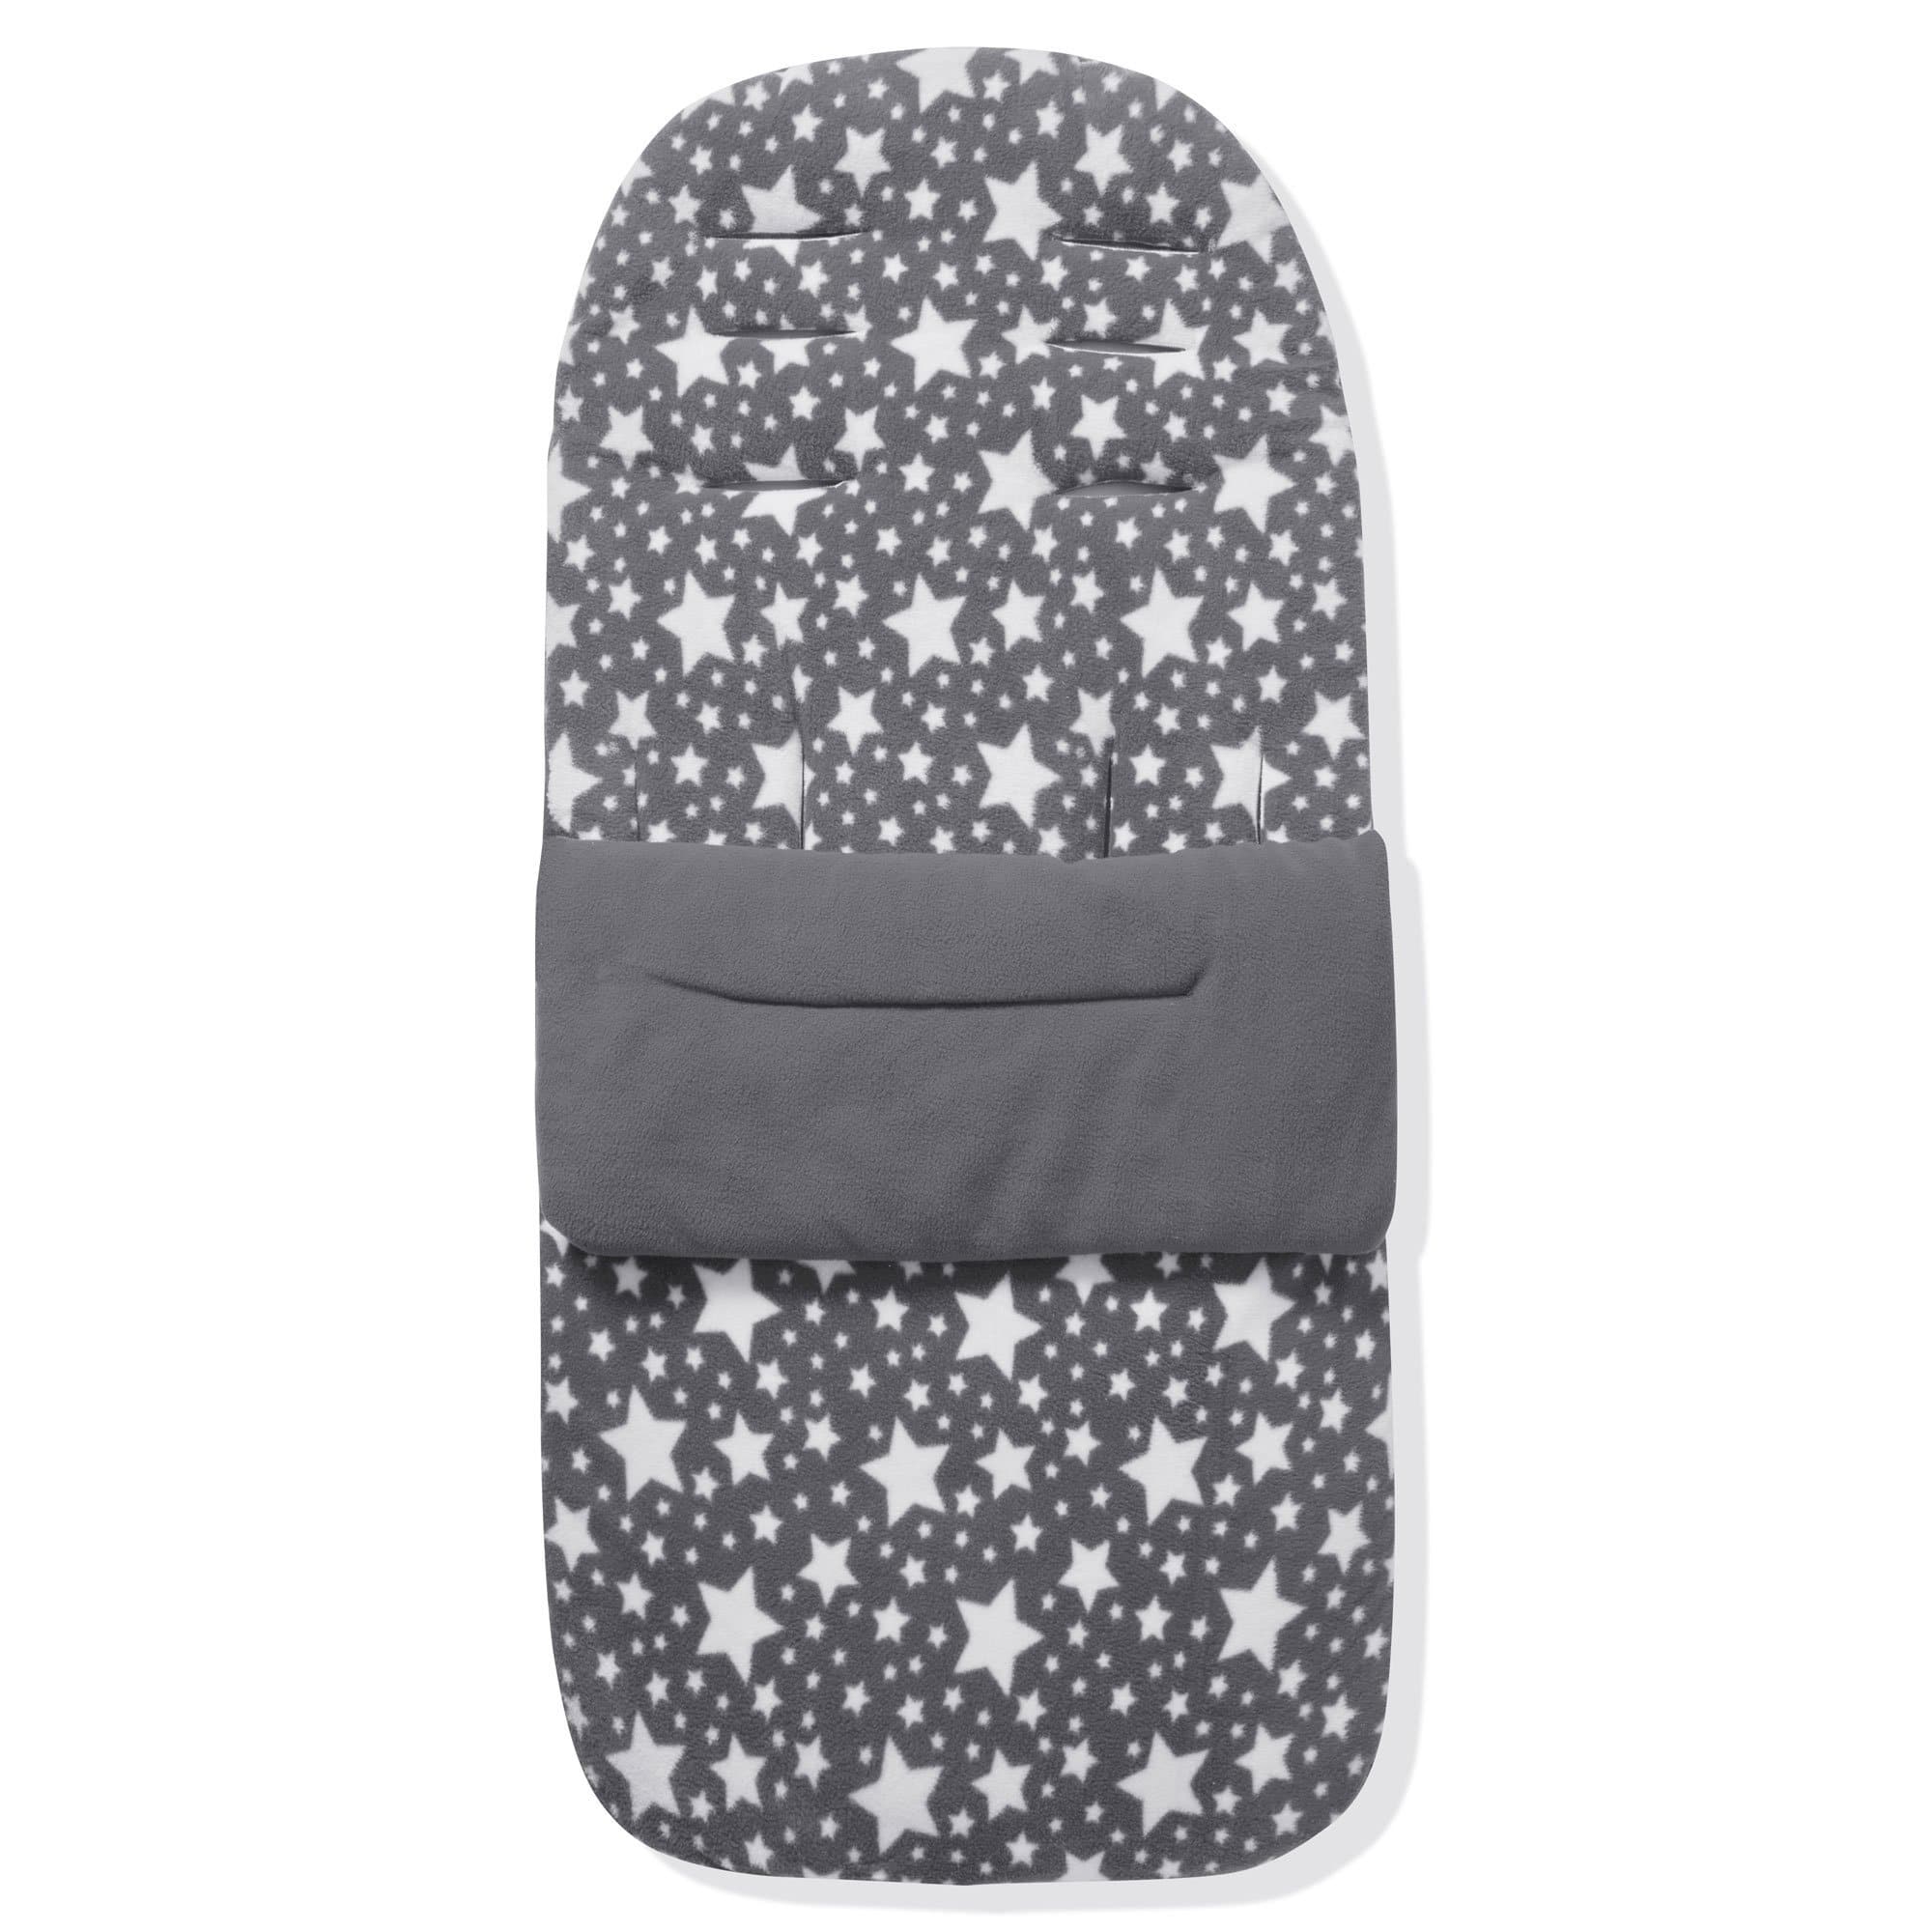 Fleece Footmuff / Cosy Toes Compatible with Pericles - For Your Little One